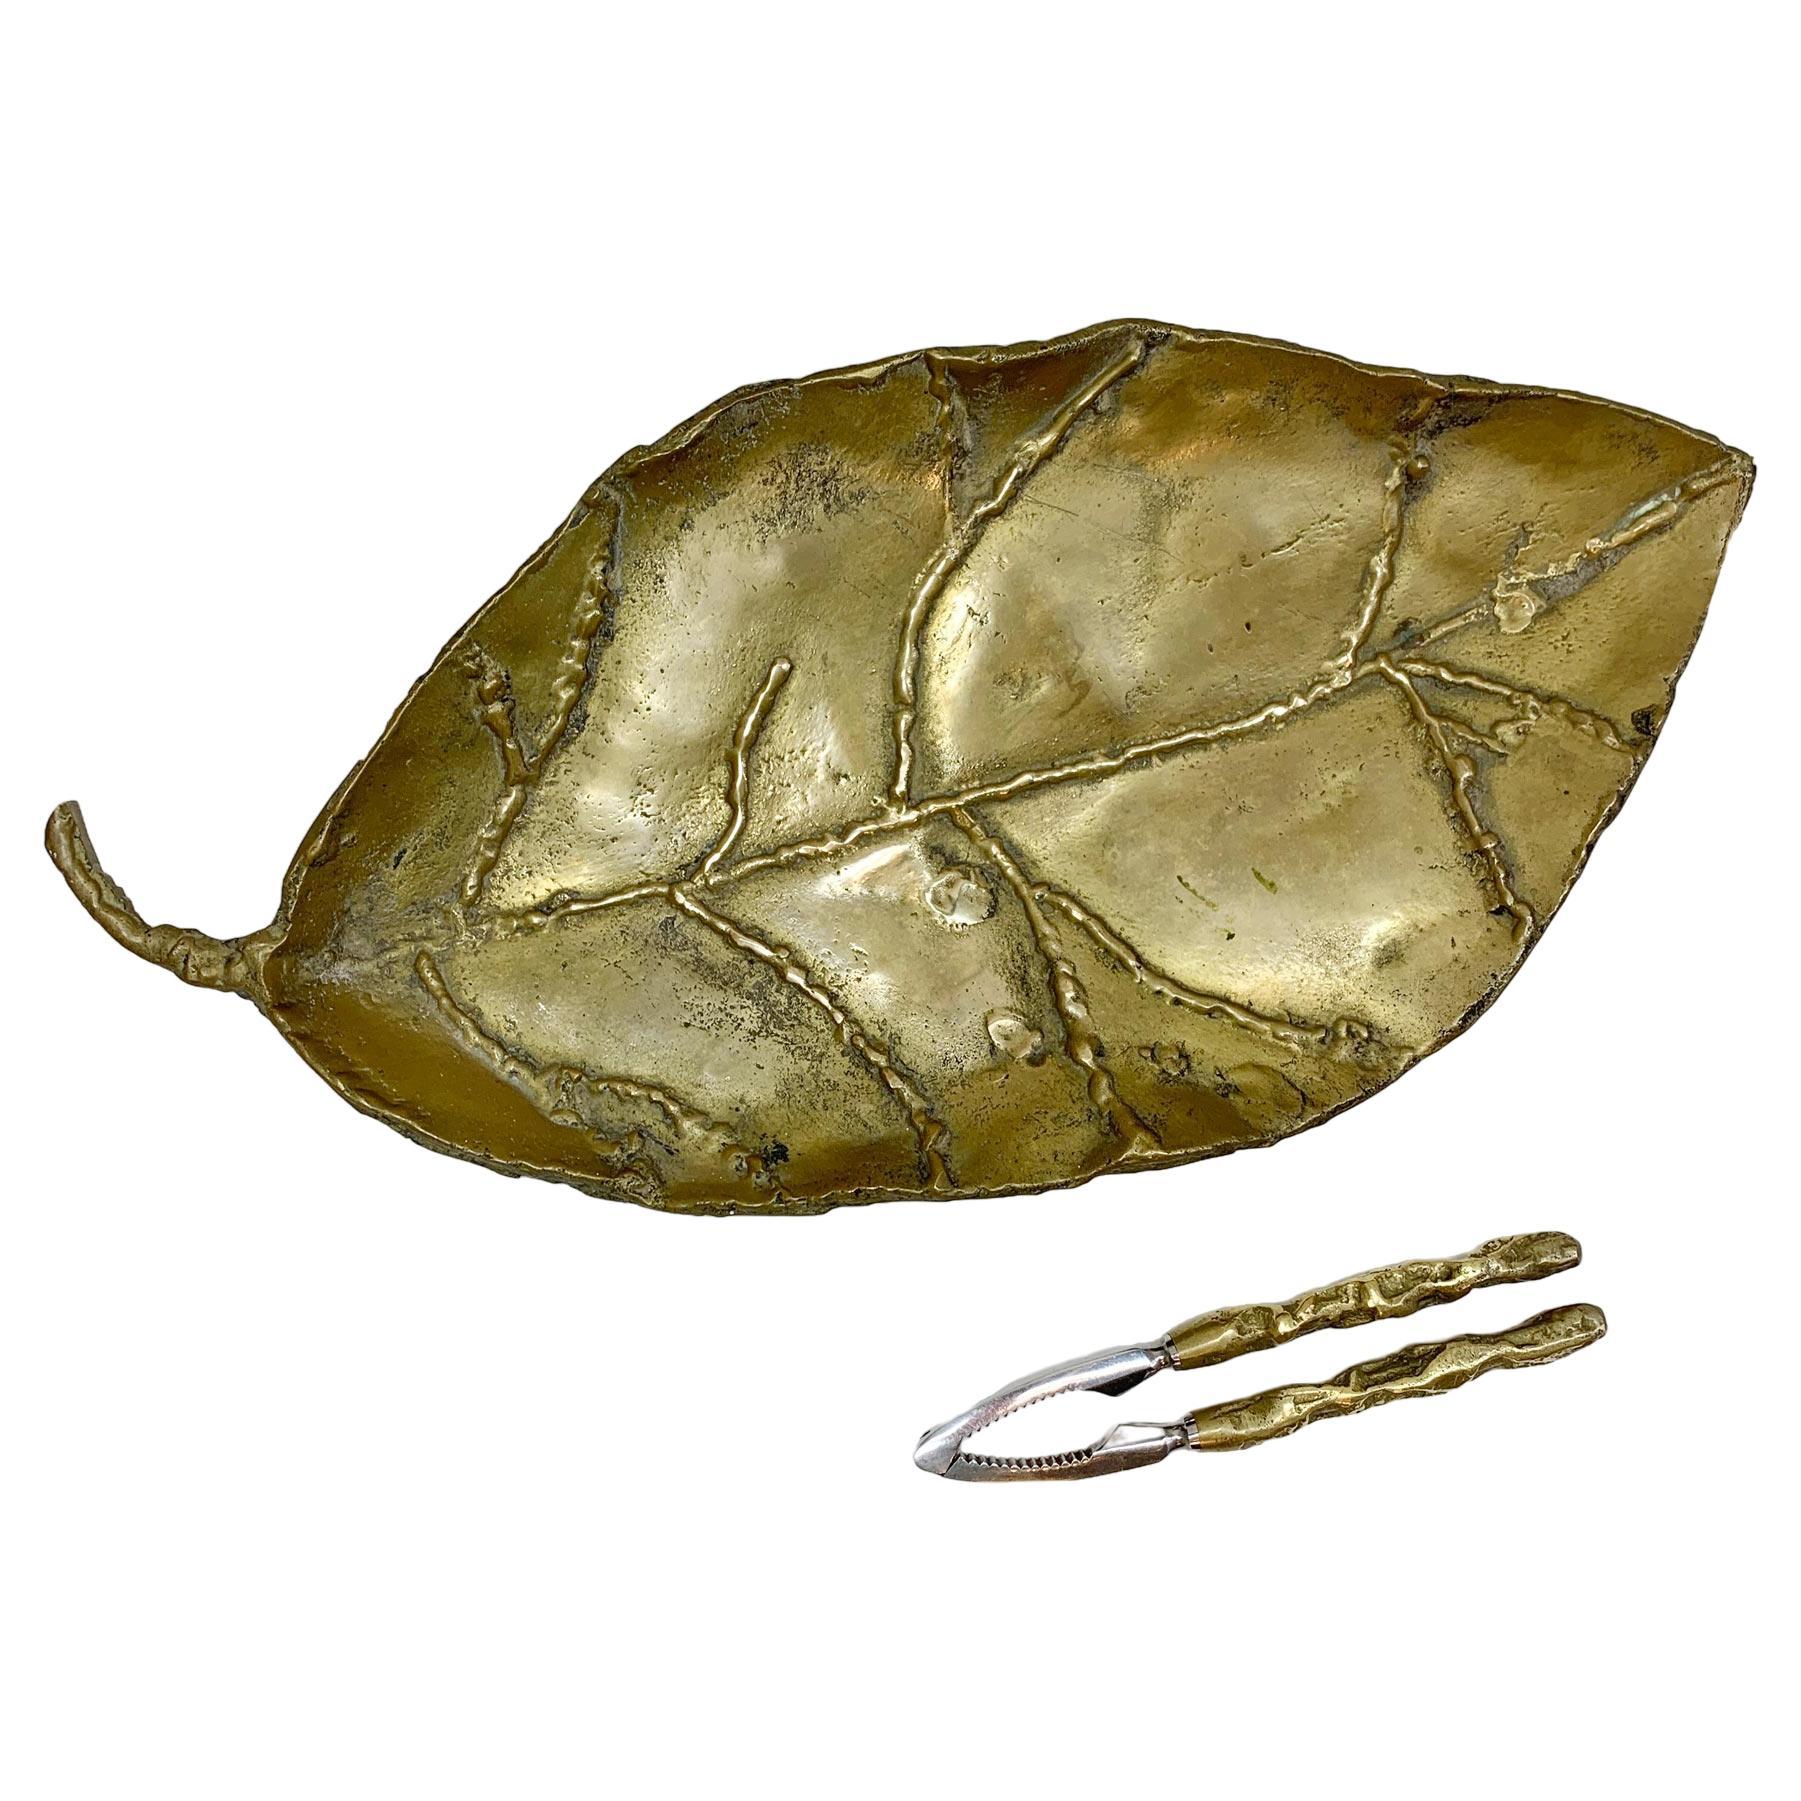 Decorative Brass Leaf Sculpture and Nut Cracker By David Marshall 1970’s For Sale